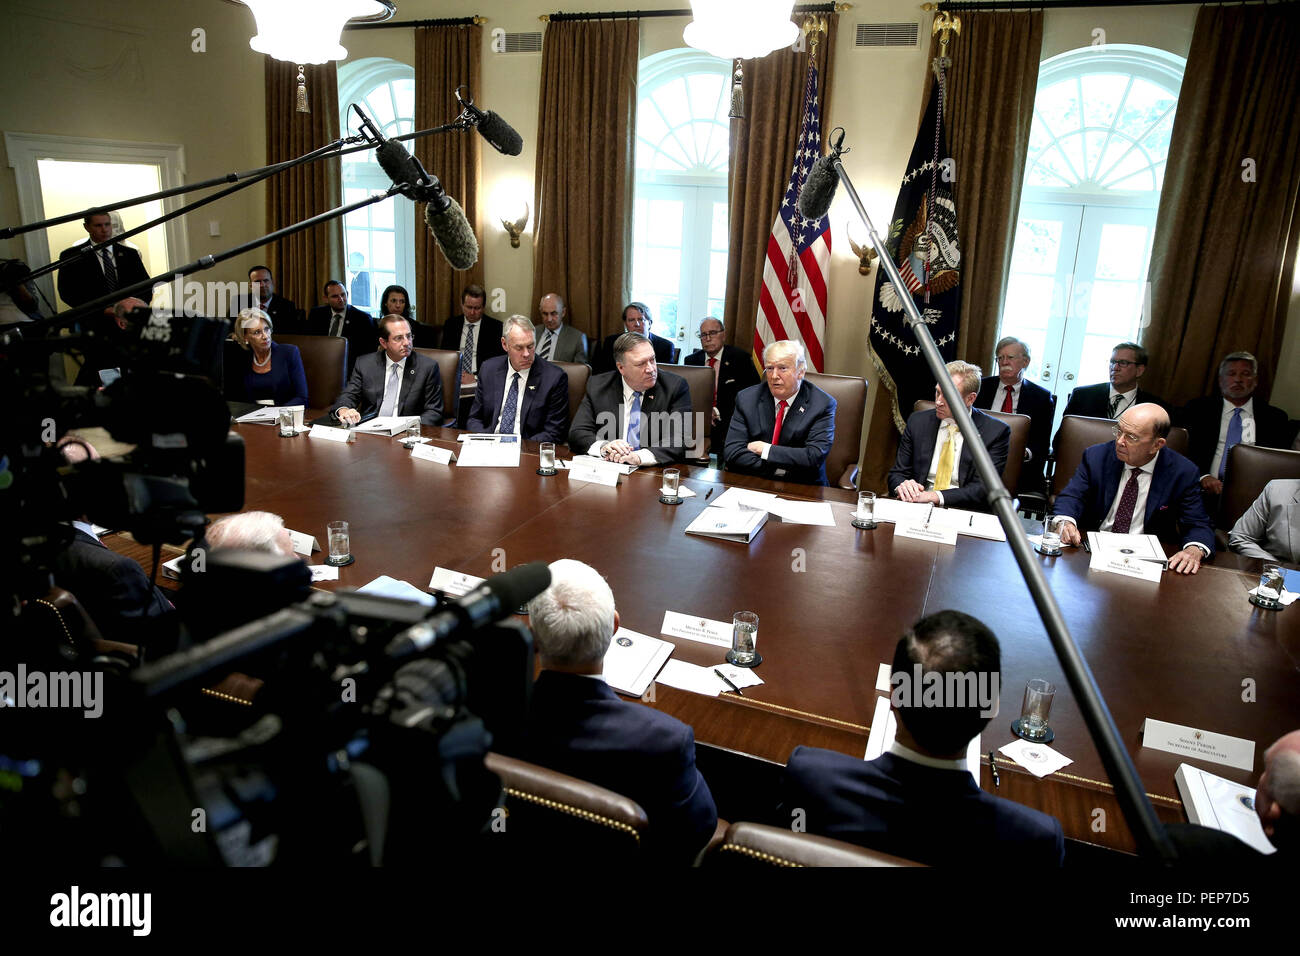 Washington, USA. August 16, 2018 - Washington, District of Columbia, United States of America - United States President Donald J. Trump, center, hosts a Cabinet Meeting in the Cabinet Room of the White House on August 16, 2018 in Washington, DC. Credit: Oliver Contreras/CNP/ZUMA Wire/Alamy Live News Stock Photo